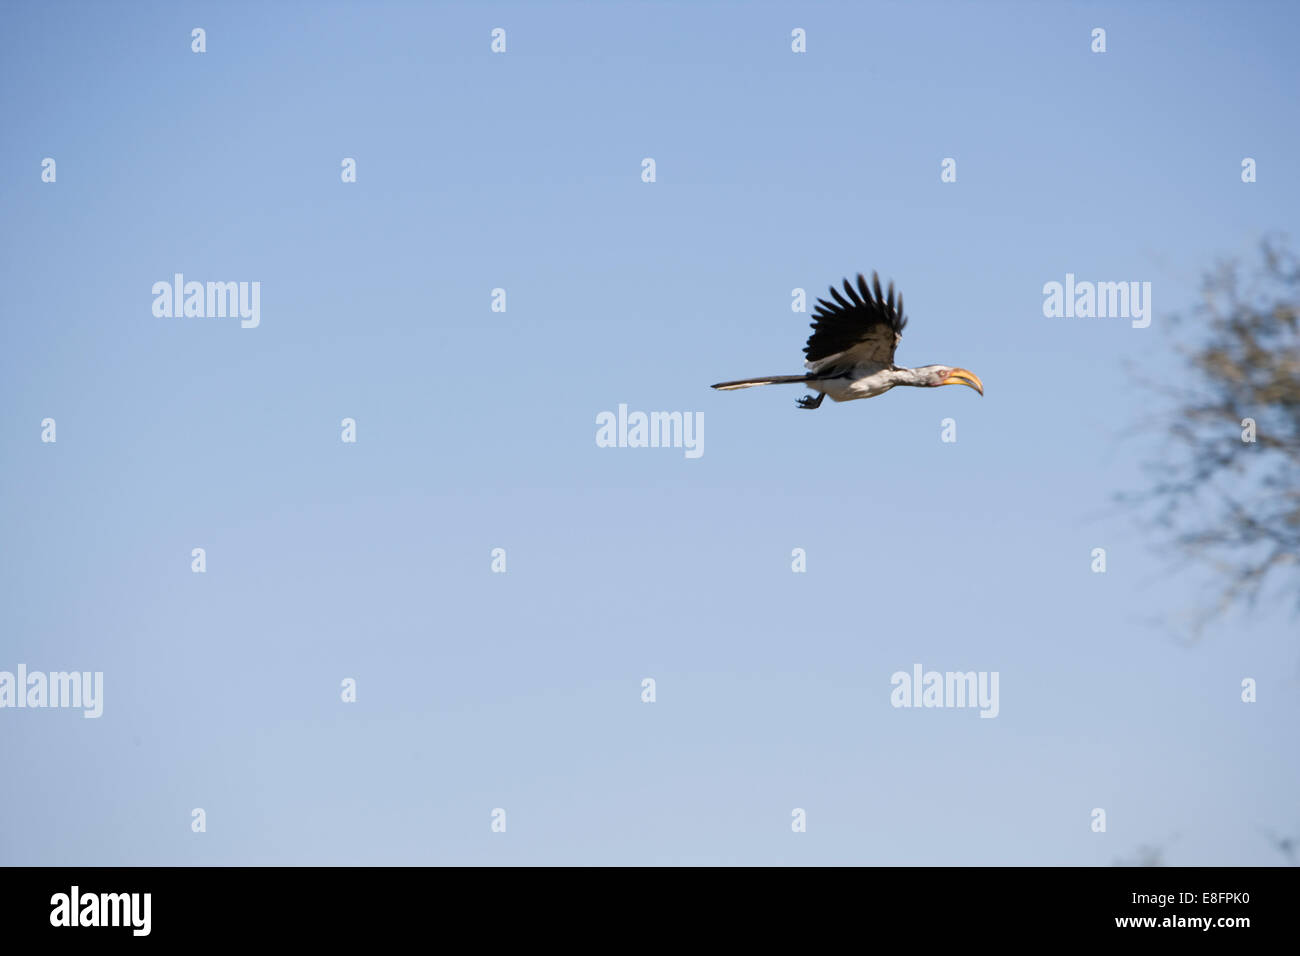 South Africa, Side view of bird in flight Stock Photo